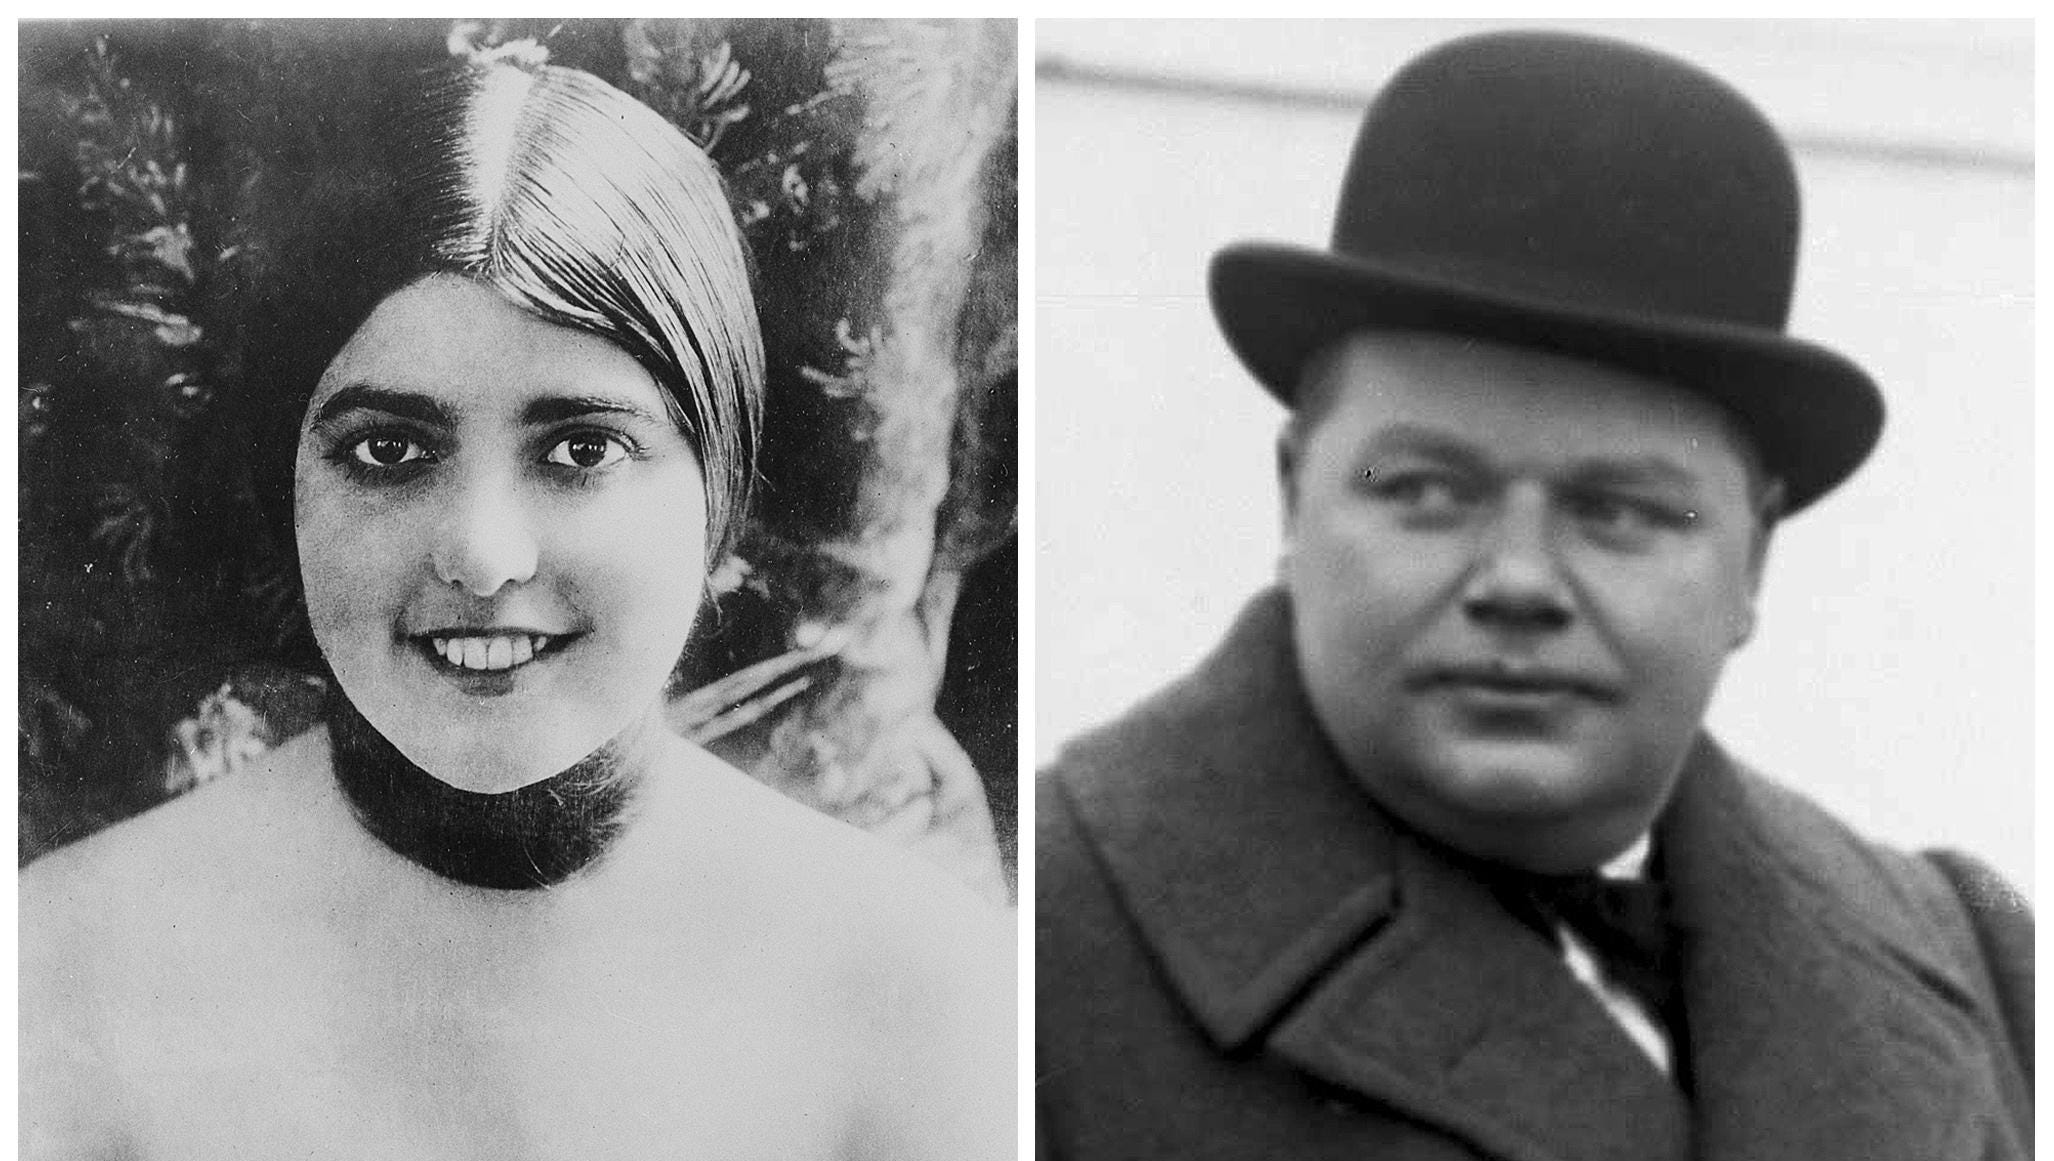 This combination photo shows actress Virginia Rappe in 1921, left, and comedian Roscoe "Fatty" Arbuckle. In the first scandal to shake Hollywood, Arbuckle attended a wild party in San Francisco in 1921 ended in the death of starlet Rappe. Rappe, writhing in pain from a ruptured bladder, accused Arbuckle of raping her.